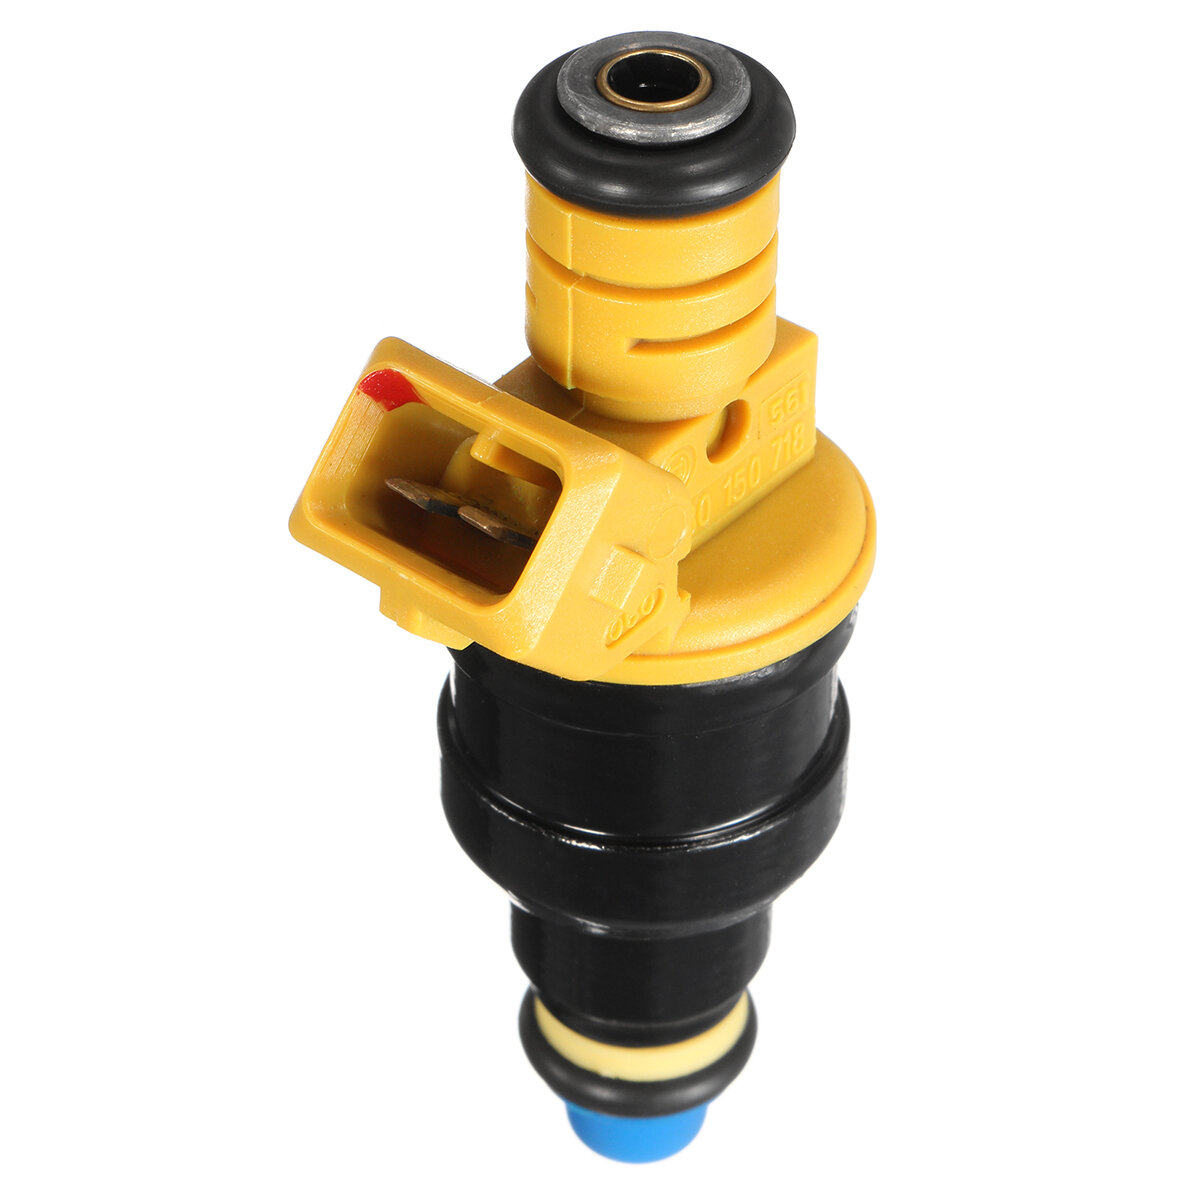 Fuel Injectors Yellow Injection Nozzle For Ford F150 F250 F350 93-03 V8 #0280150943 0280150718